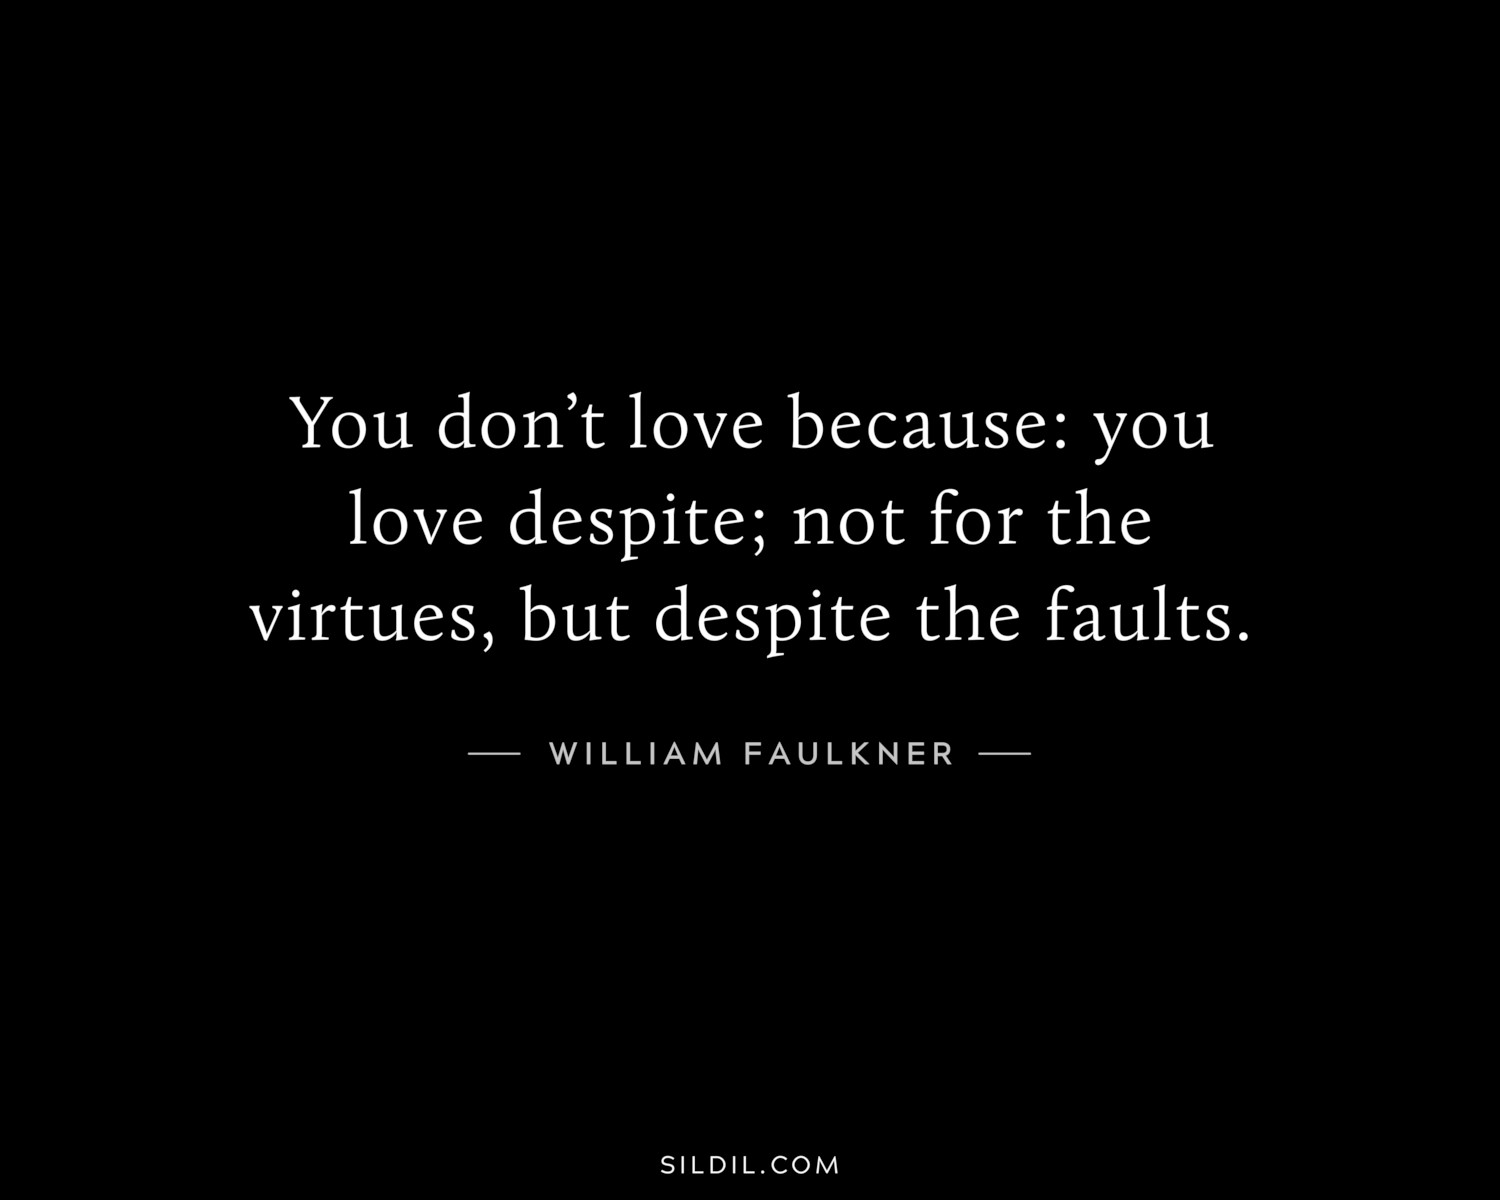 You don’t love because: you love despite; not for the virtues, but despite the faults.